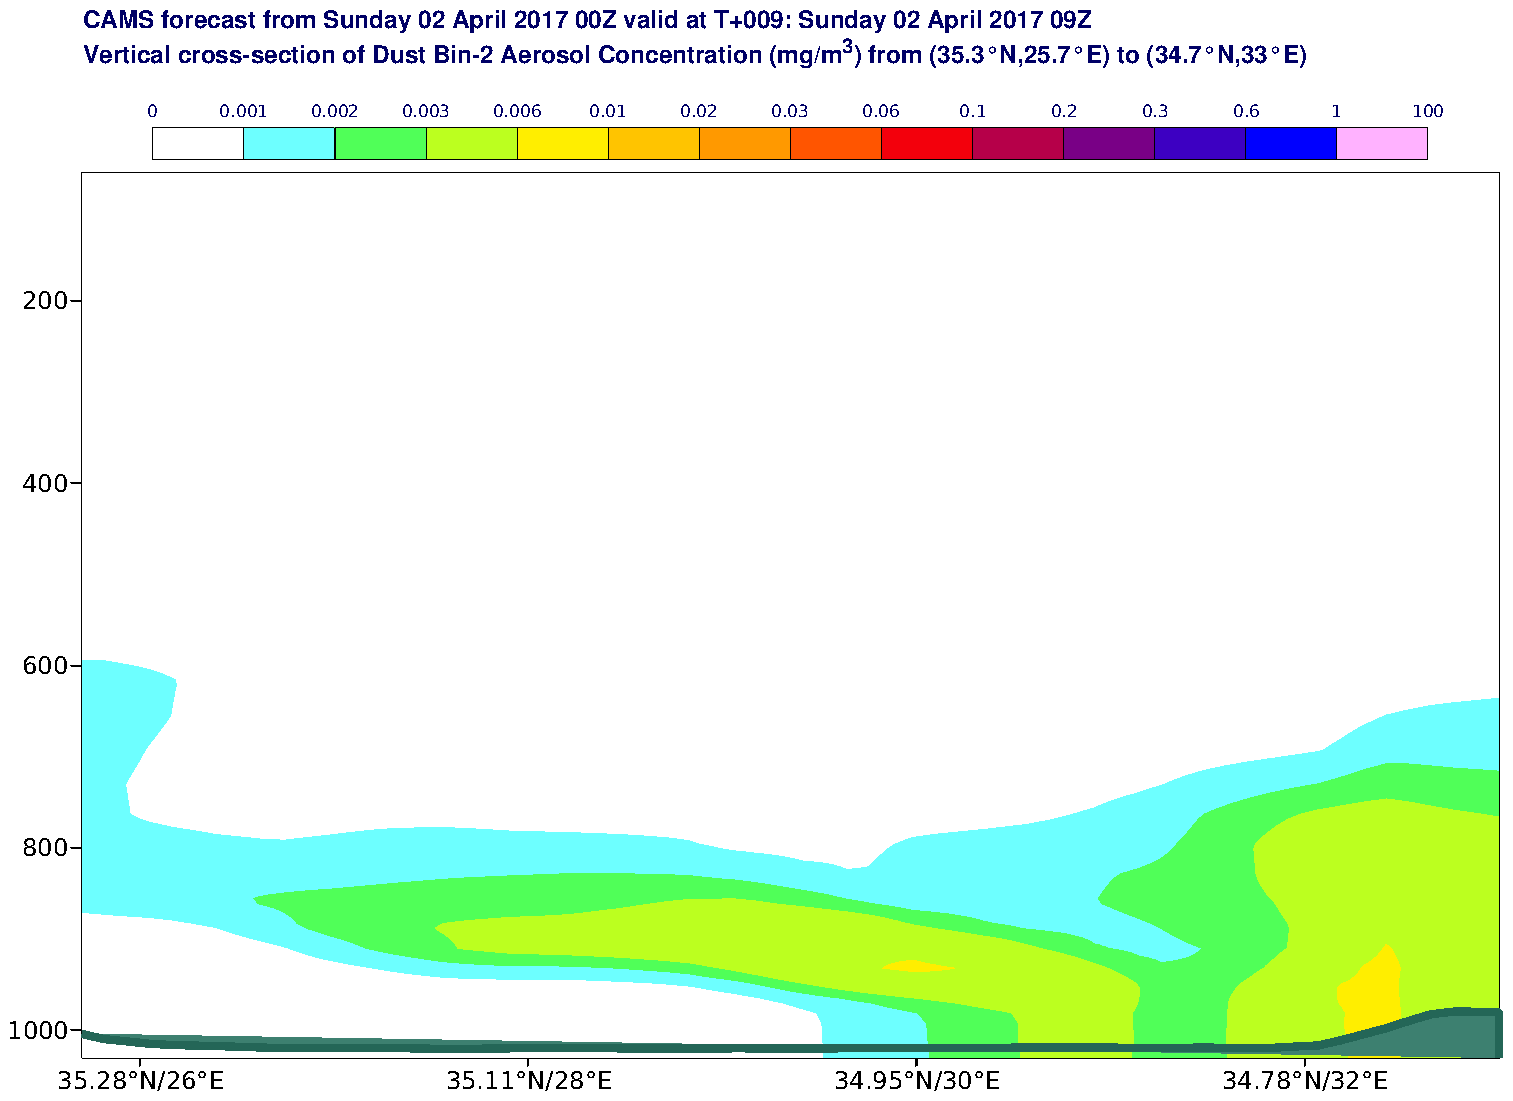 Vertical cross-section of Dust Bin-2 Aerosol Concentration (mg/m3) valid at T9 - 2017-04-02 09:00